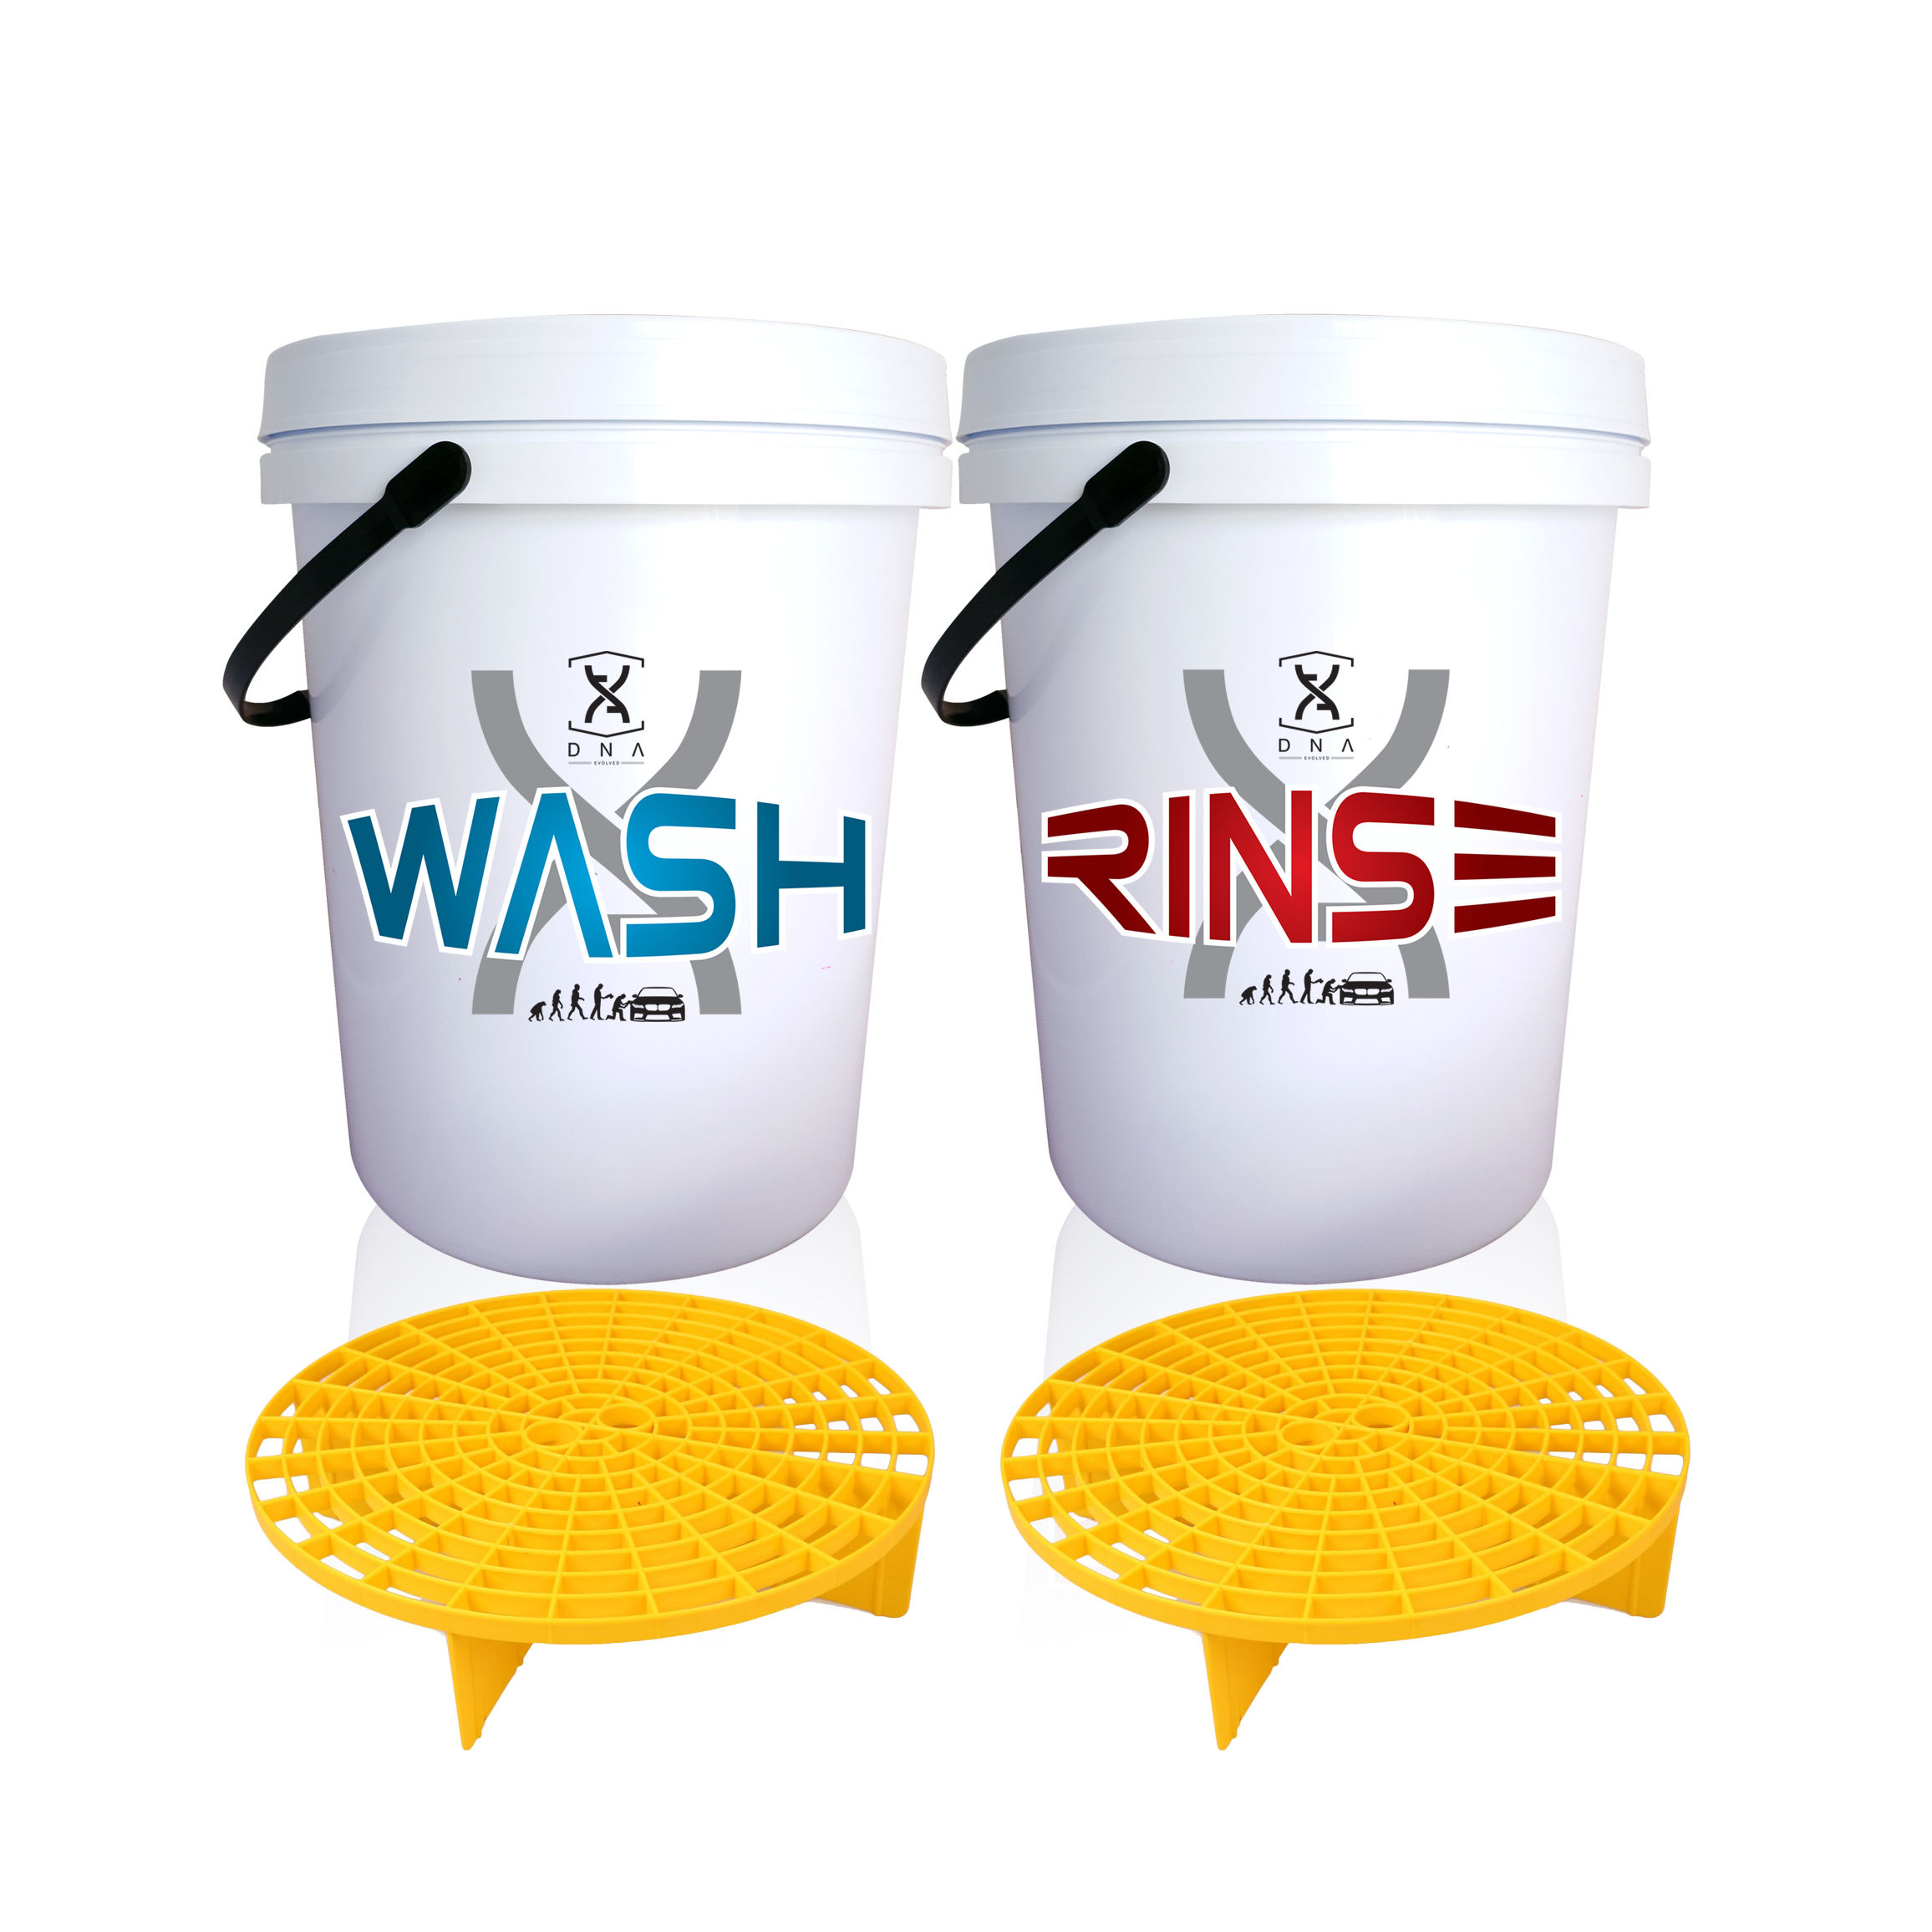 DNA-e Two Bucket Wash System